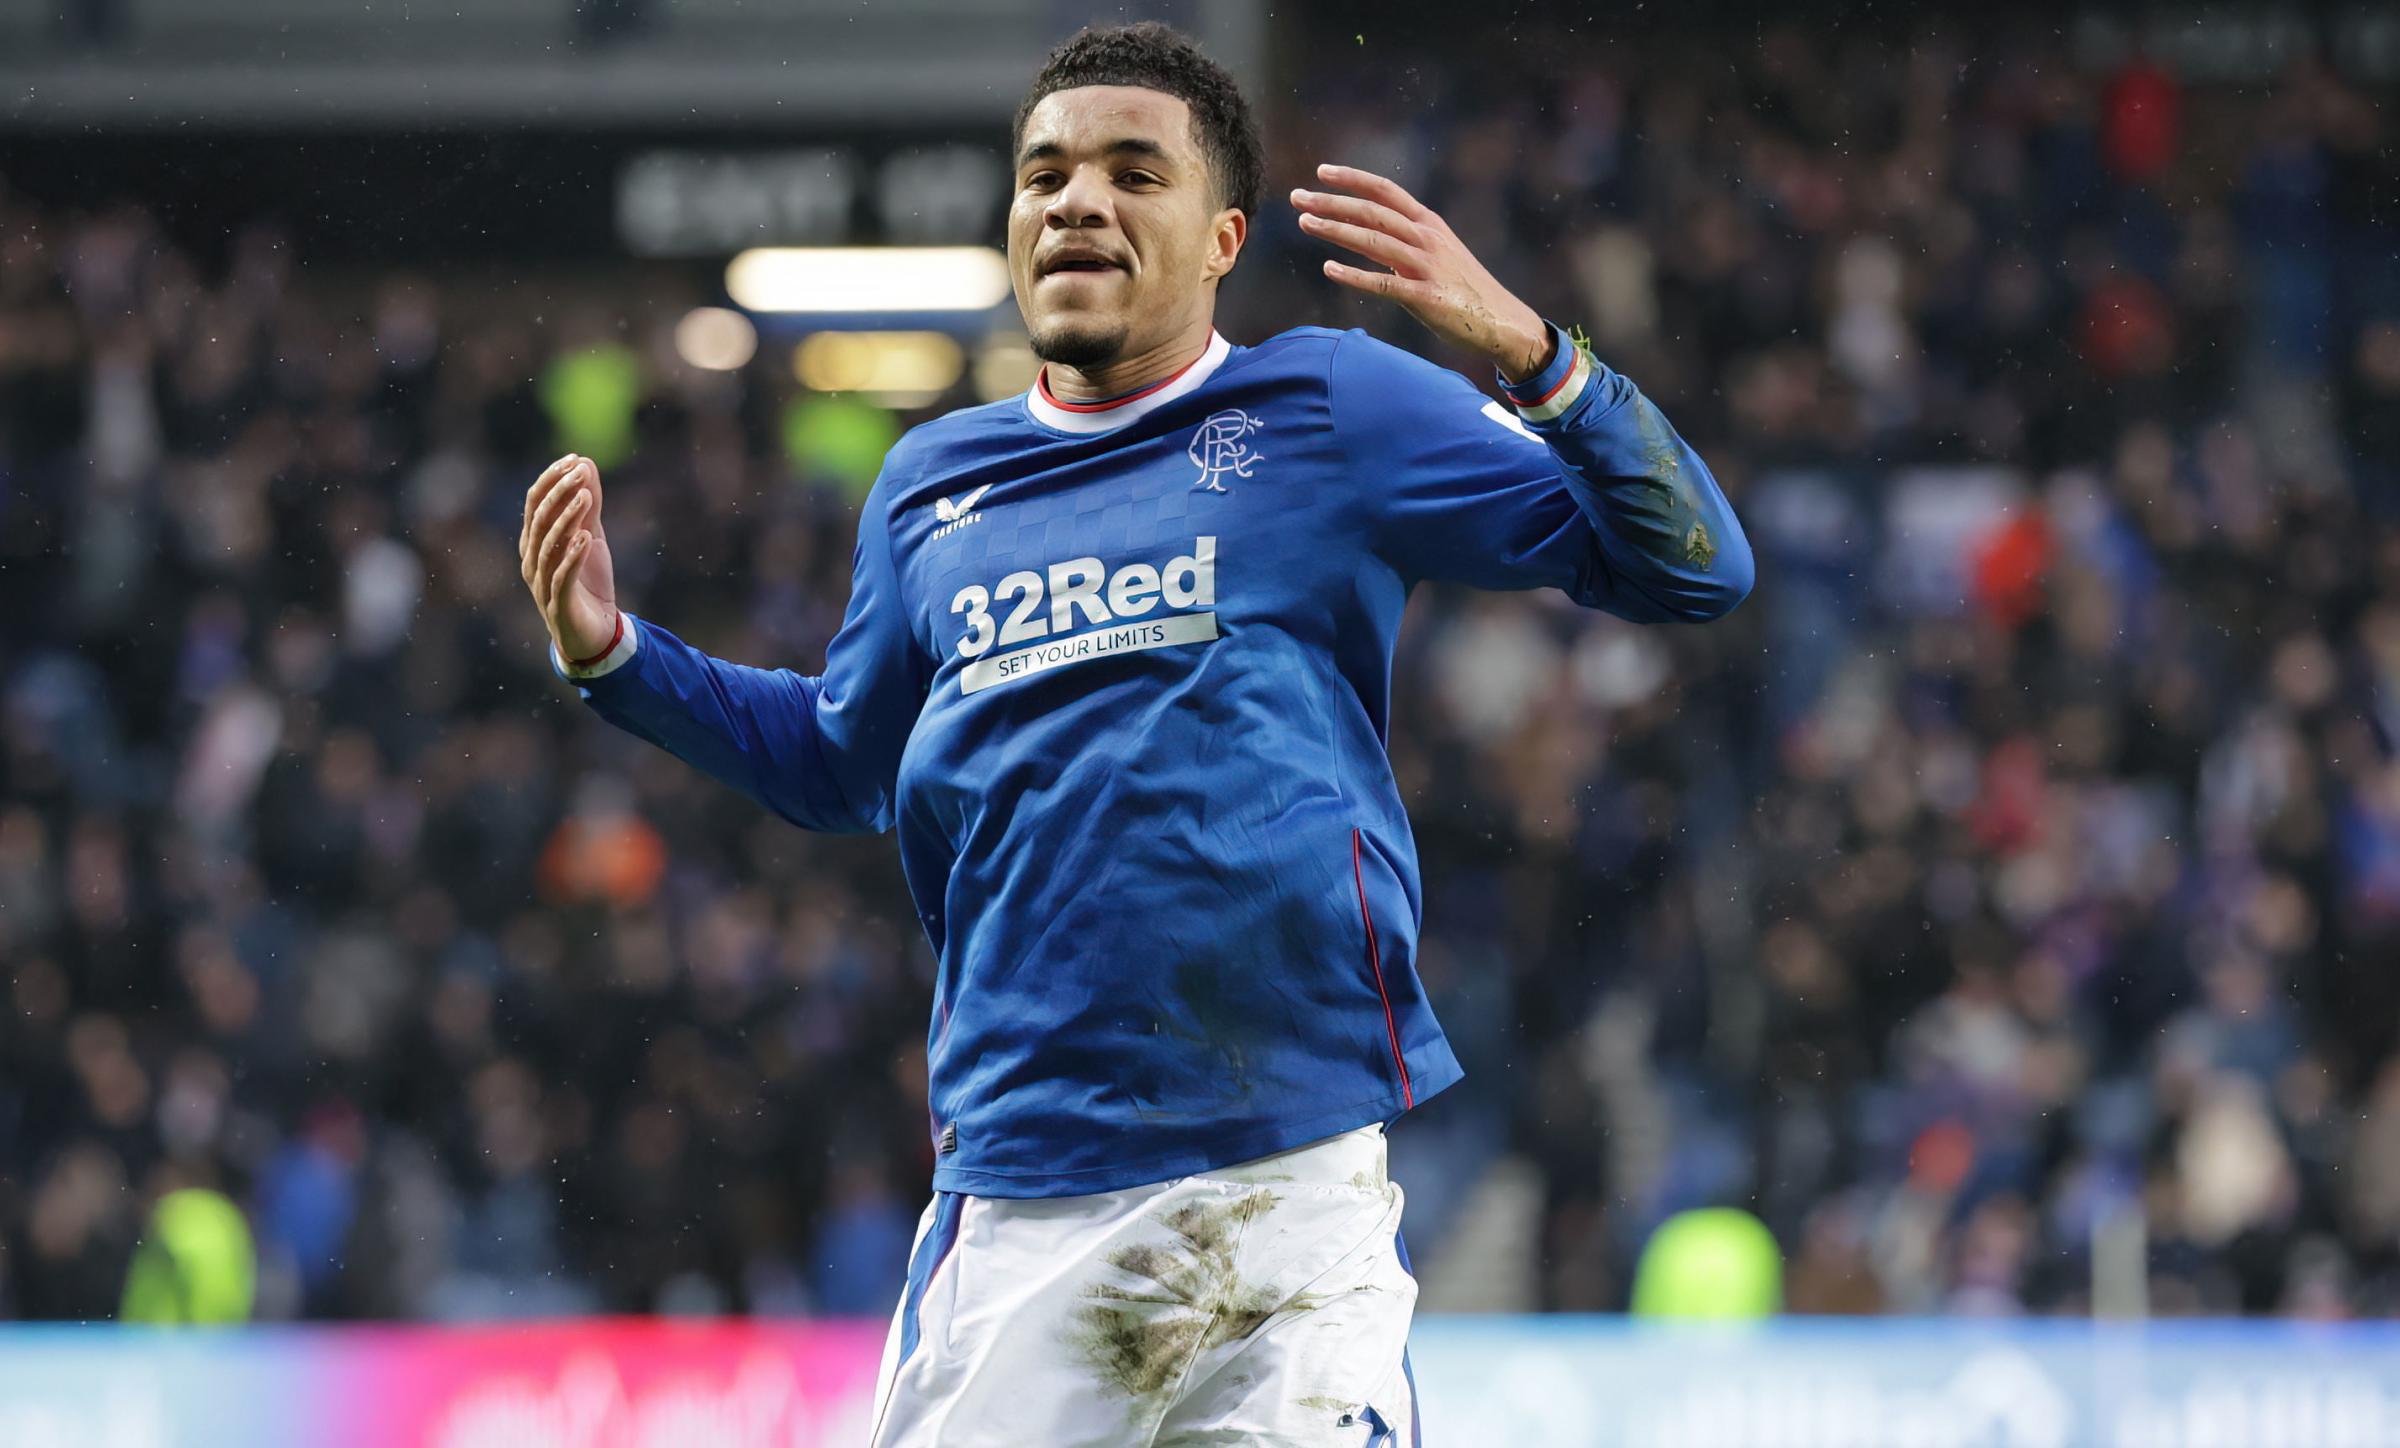 Rangers 2 Ross County 1: Michael Beale's side survive Ibrox scare